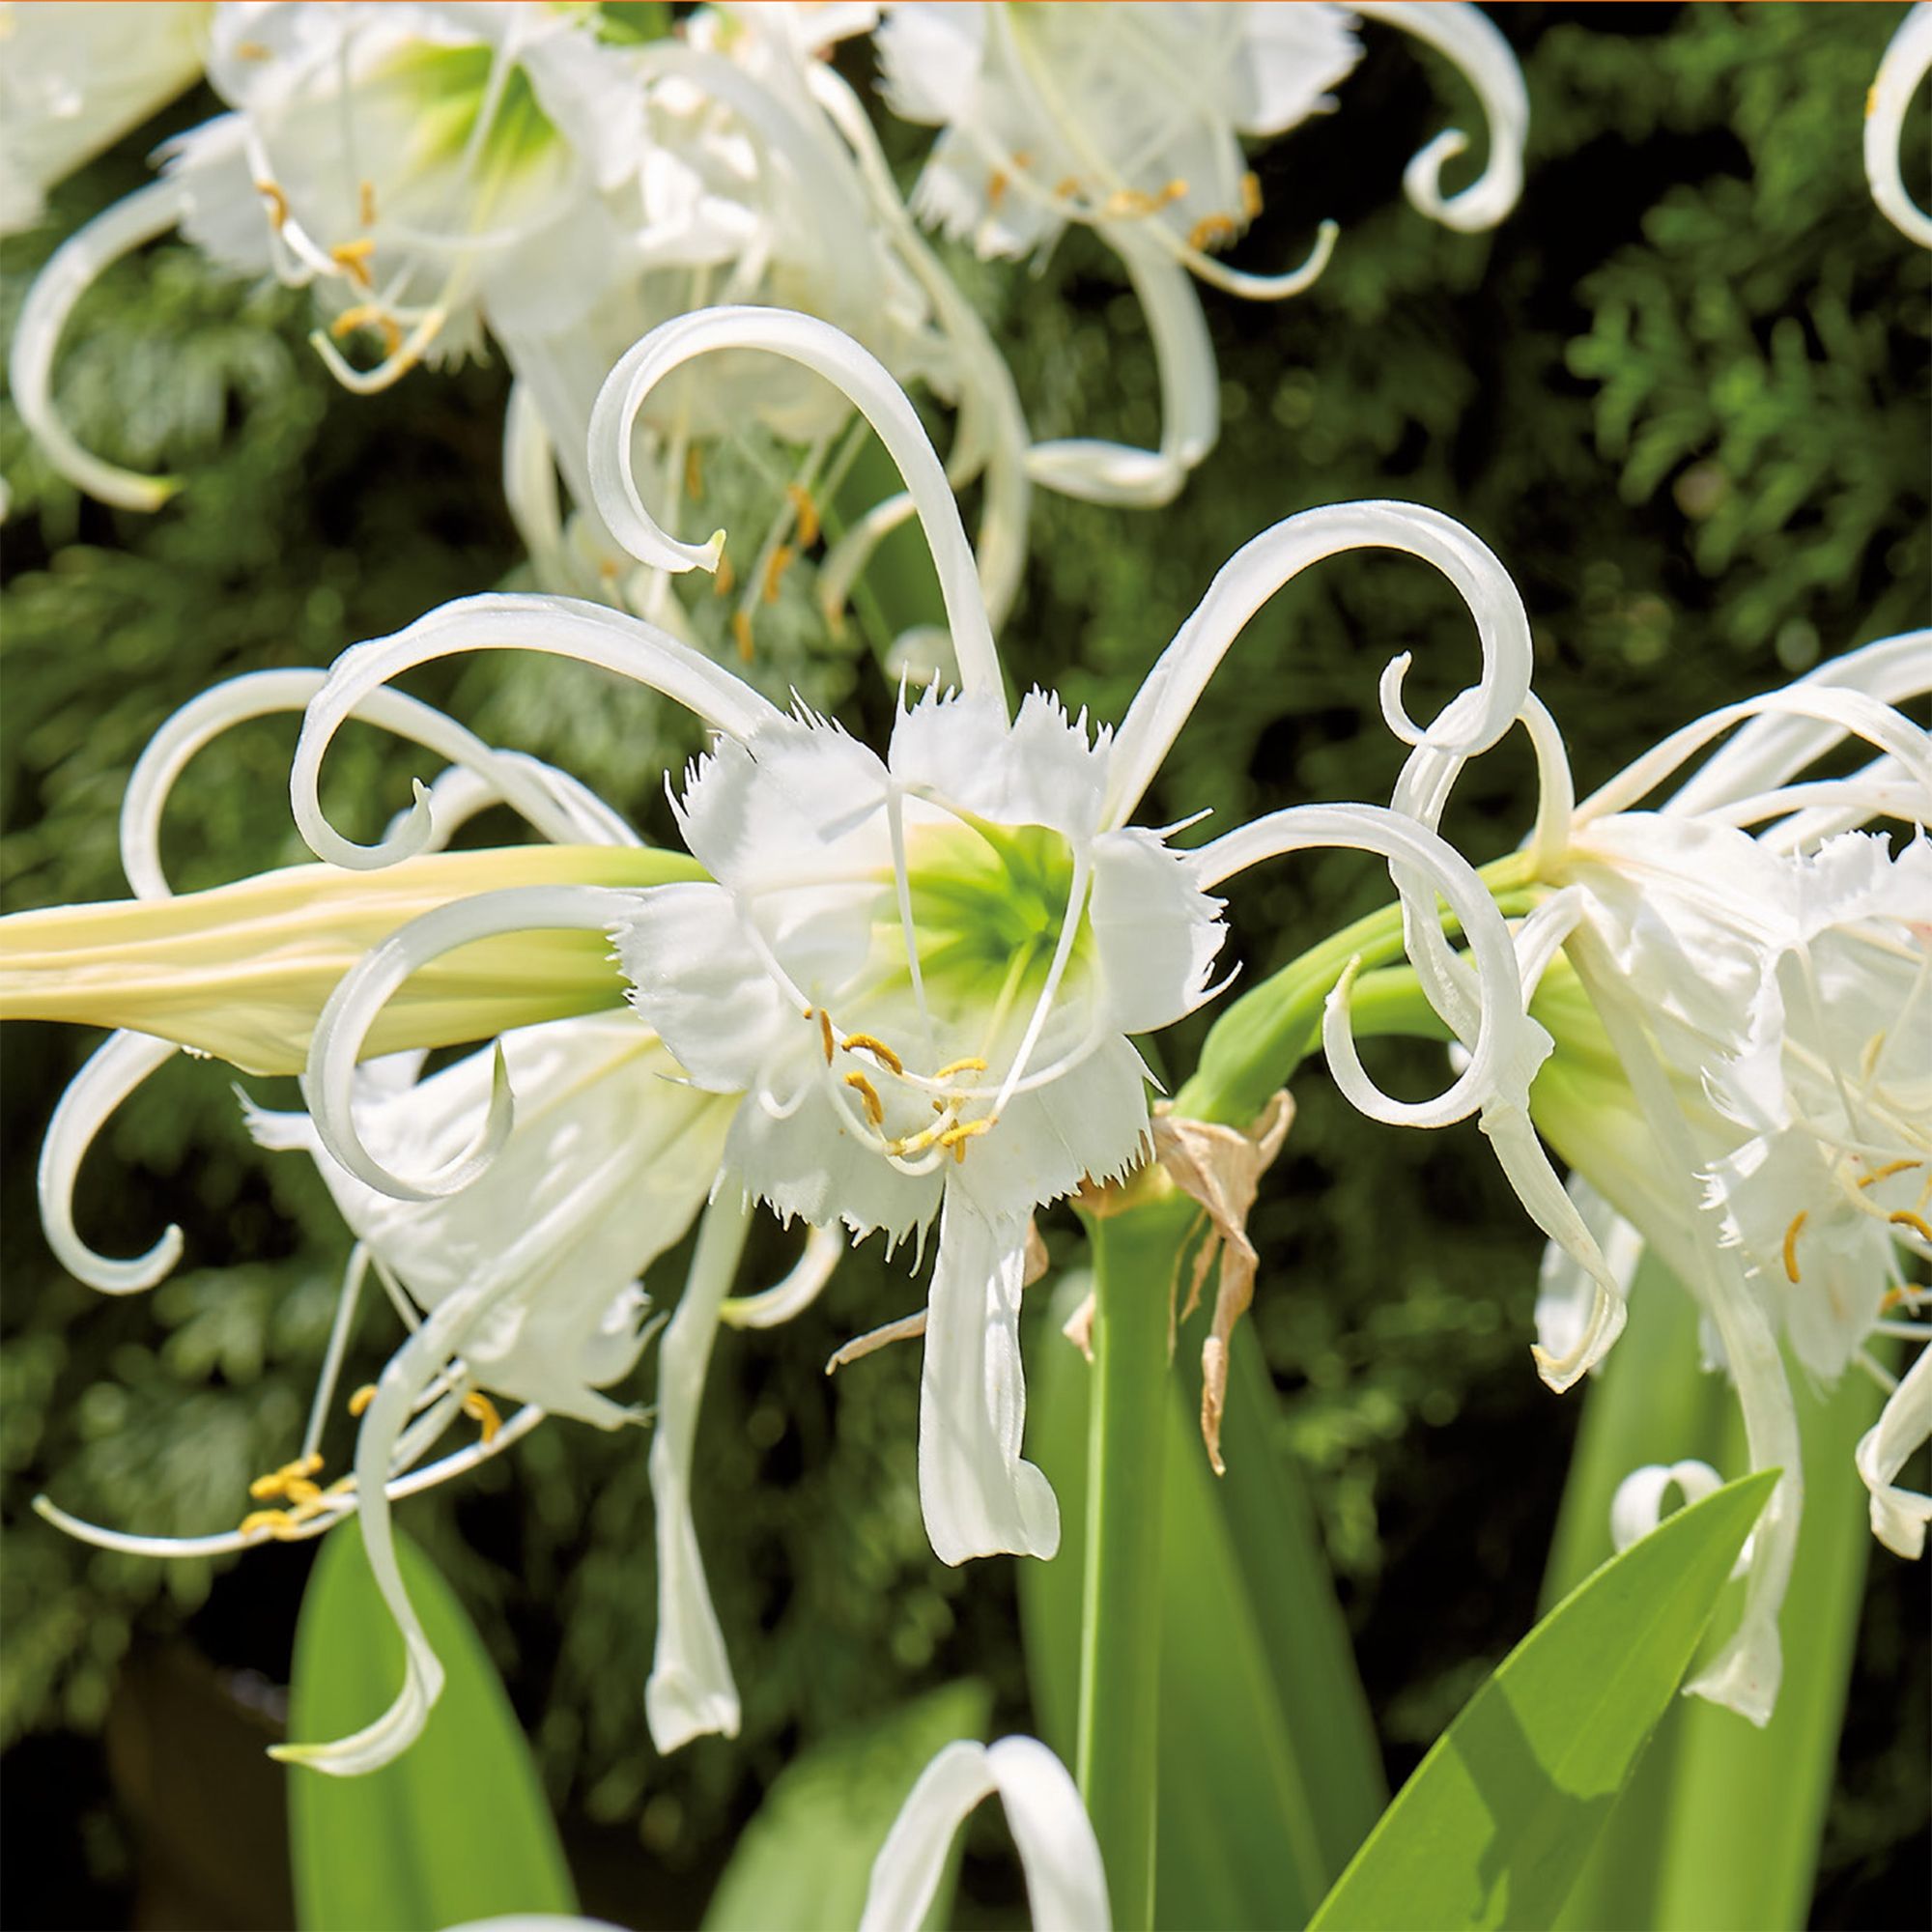 Spider Lily, Peruvian Daffodil Flower bulb, Pack of 3